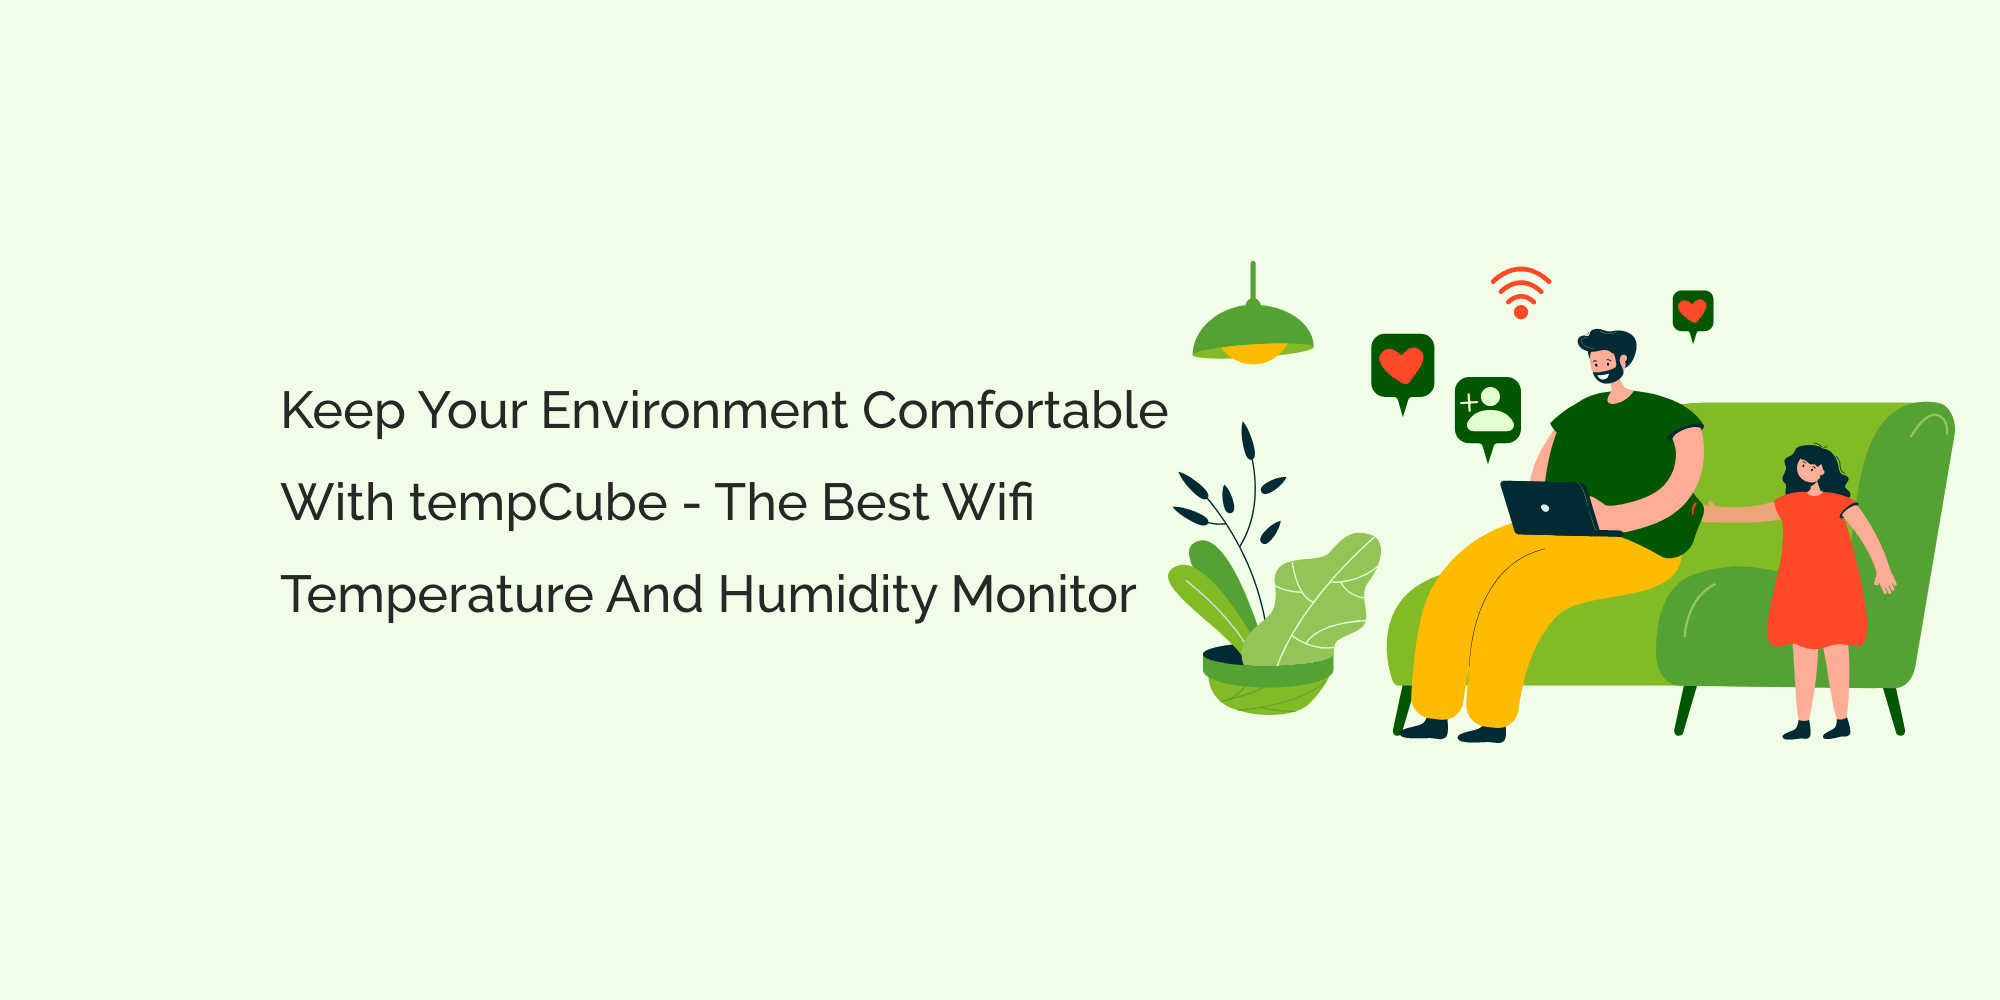 Keep Your Environment Comfortable with tempCube - The Best WiFi Temperature and Humidity Monitor